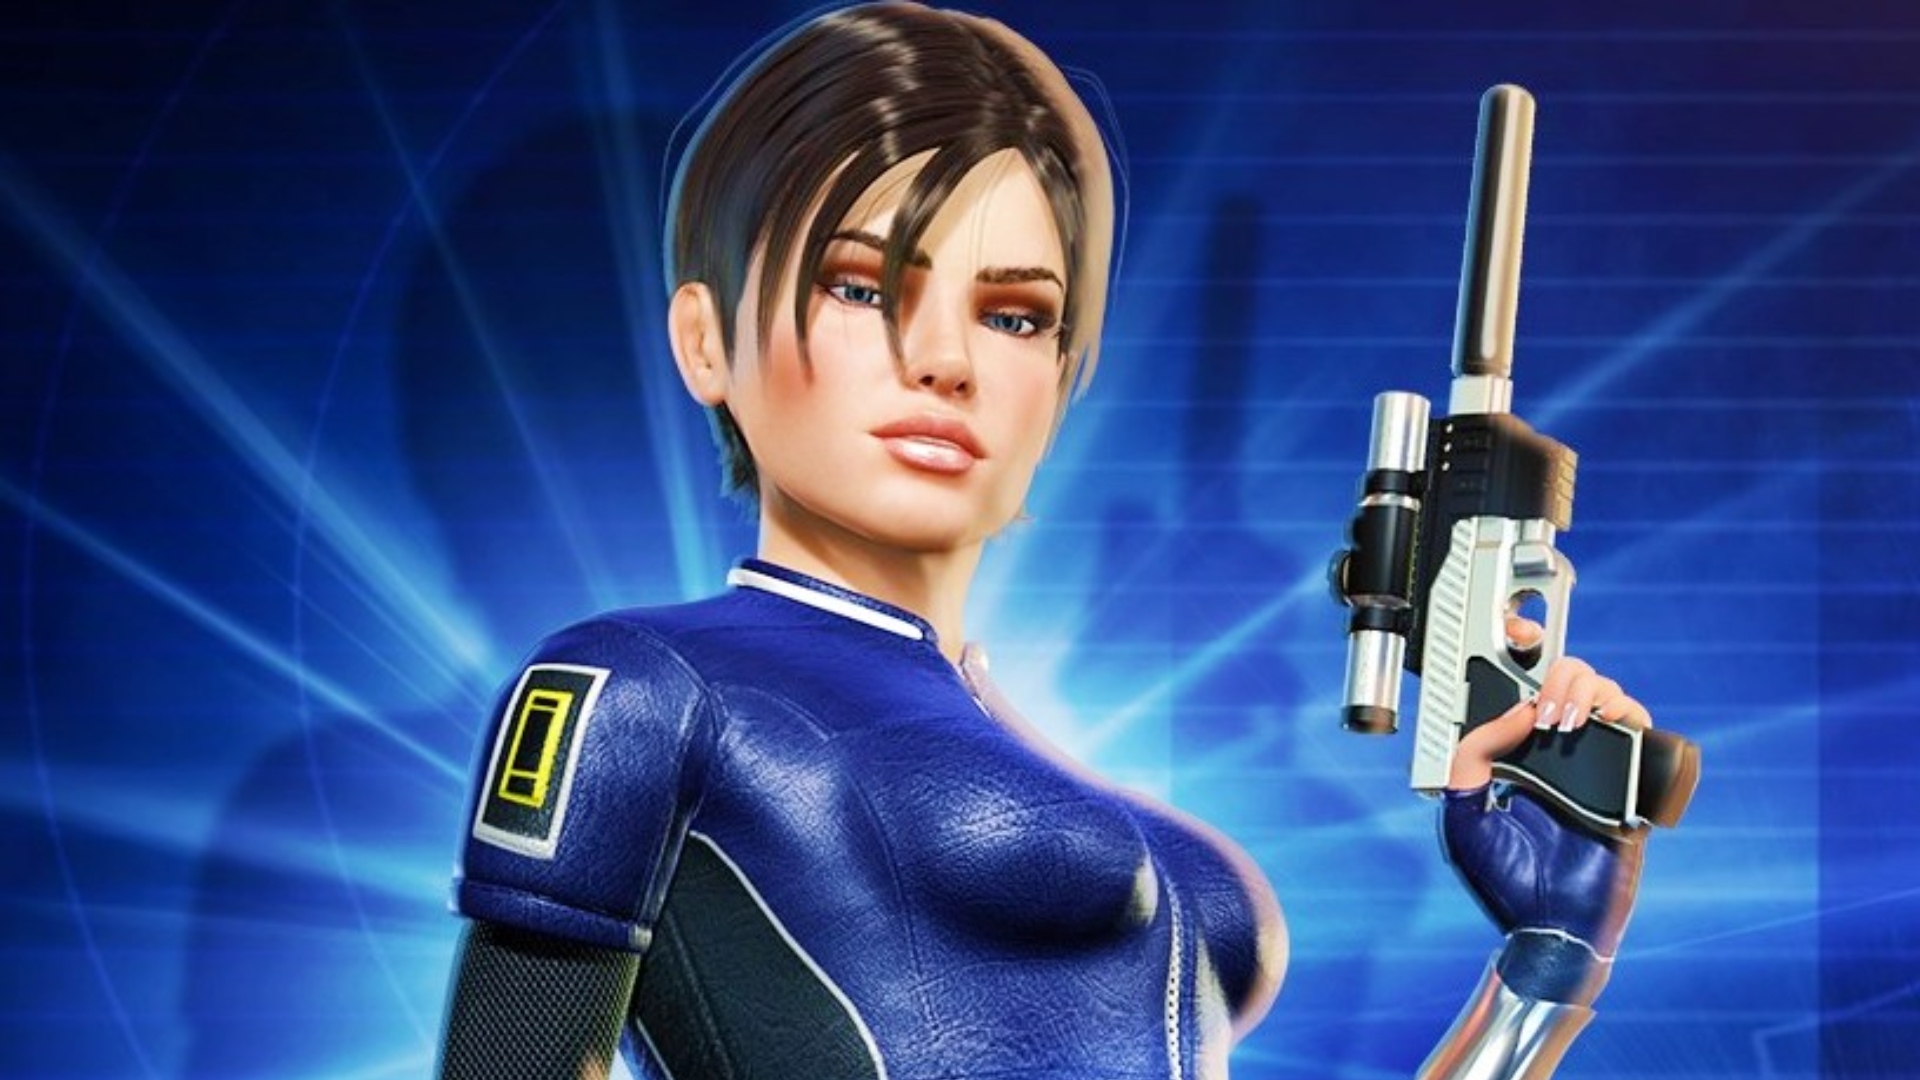 The Perfect Dark reboot is not dead, Crystal Dynamics confirms